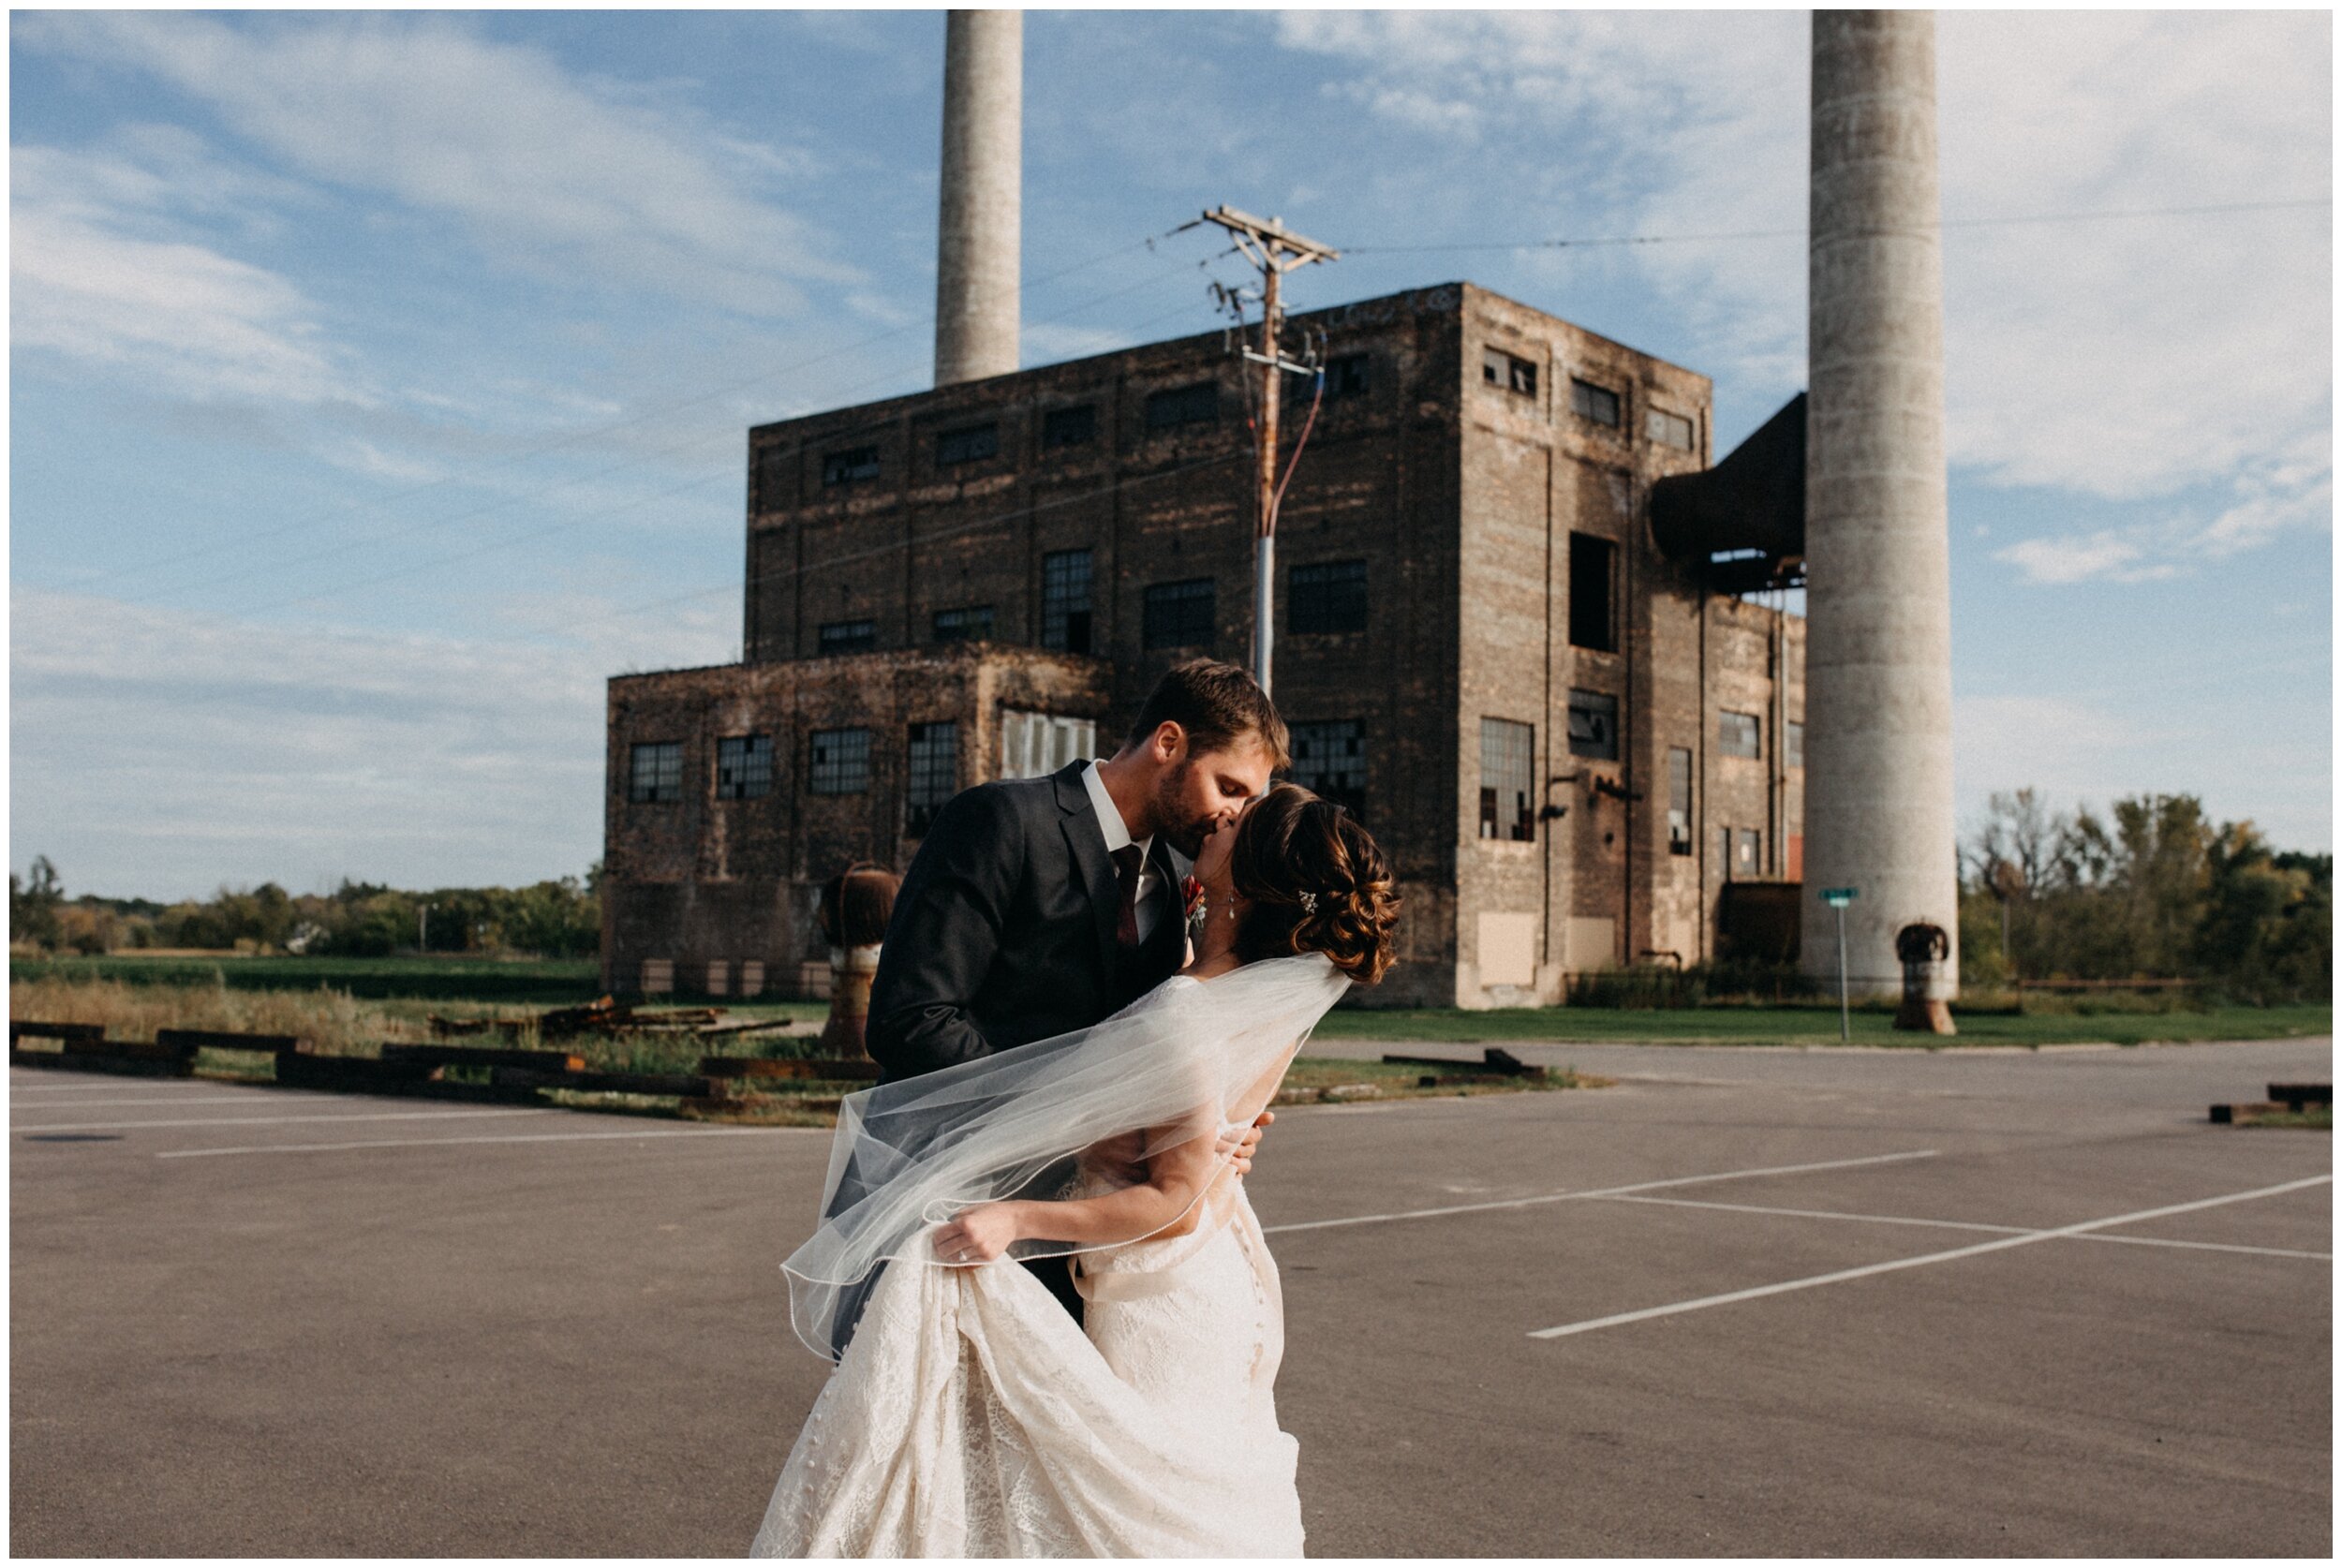 Bride and groom kissing in front of power plant industrial building at the Northern Pacific Center in Brainerd, Minnesota